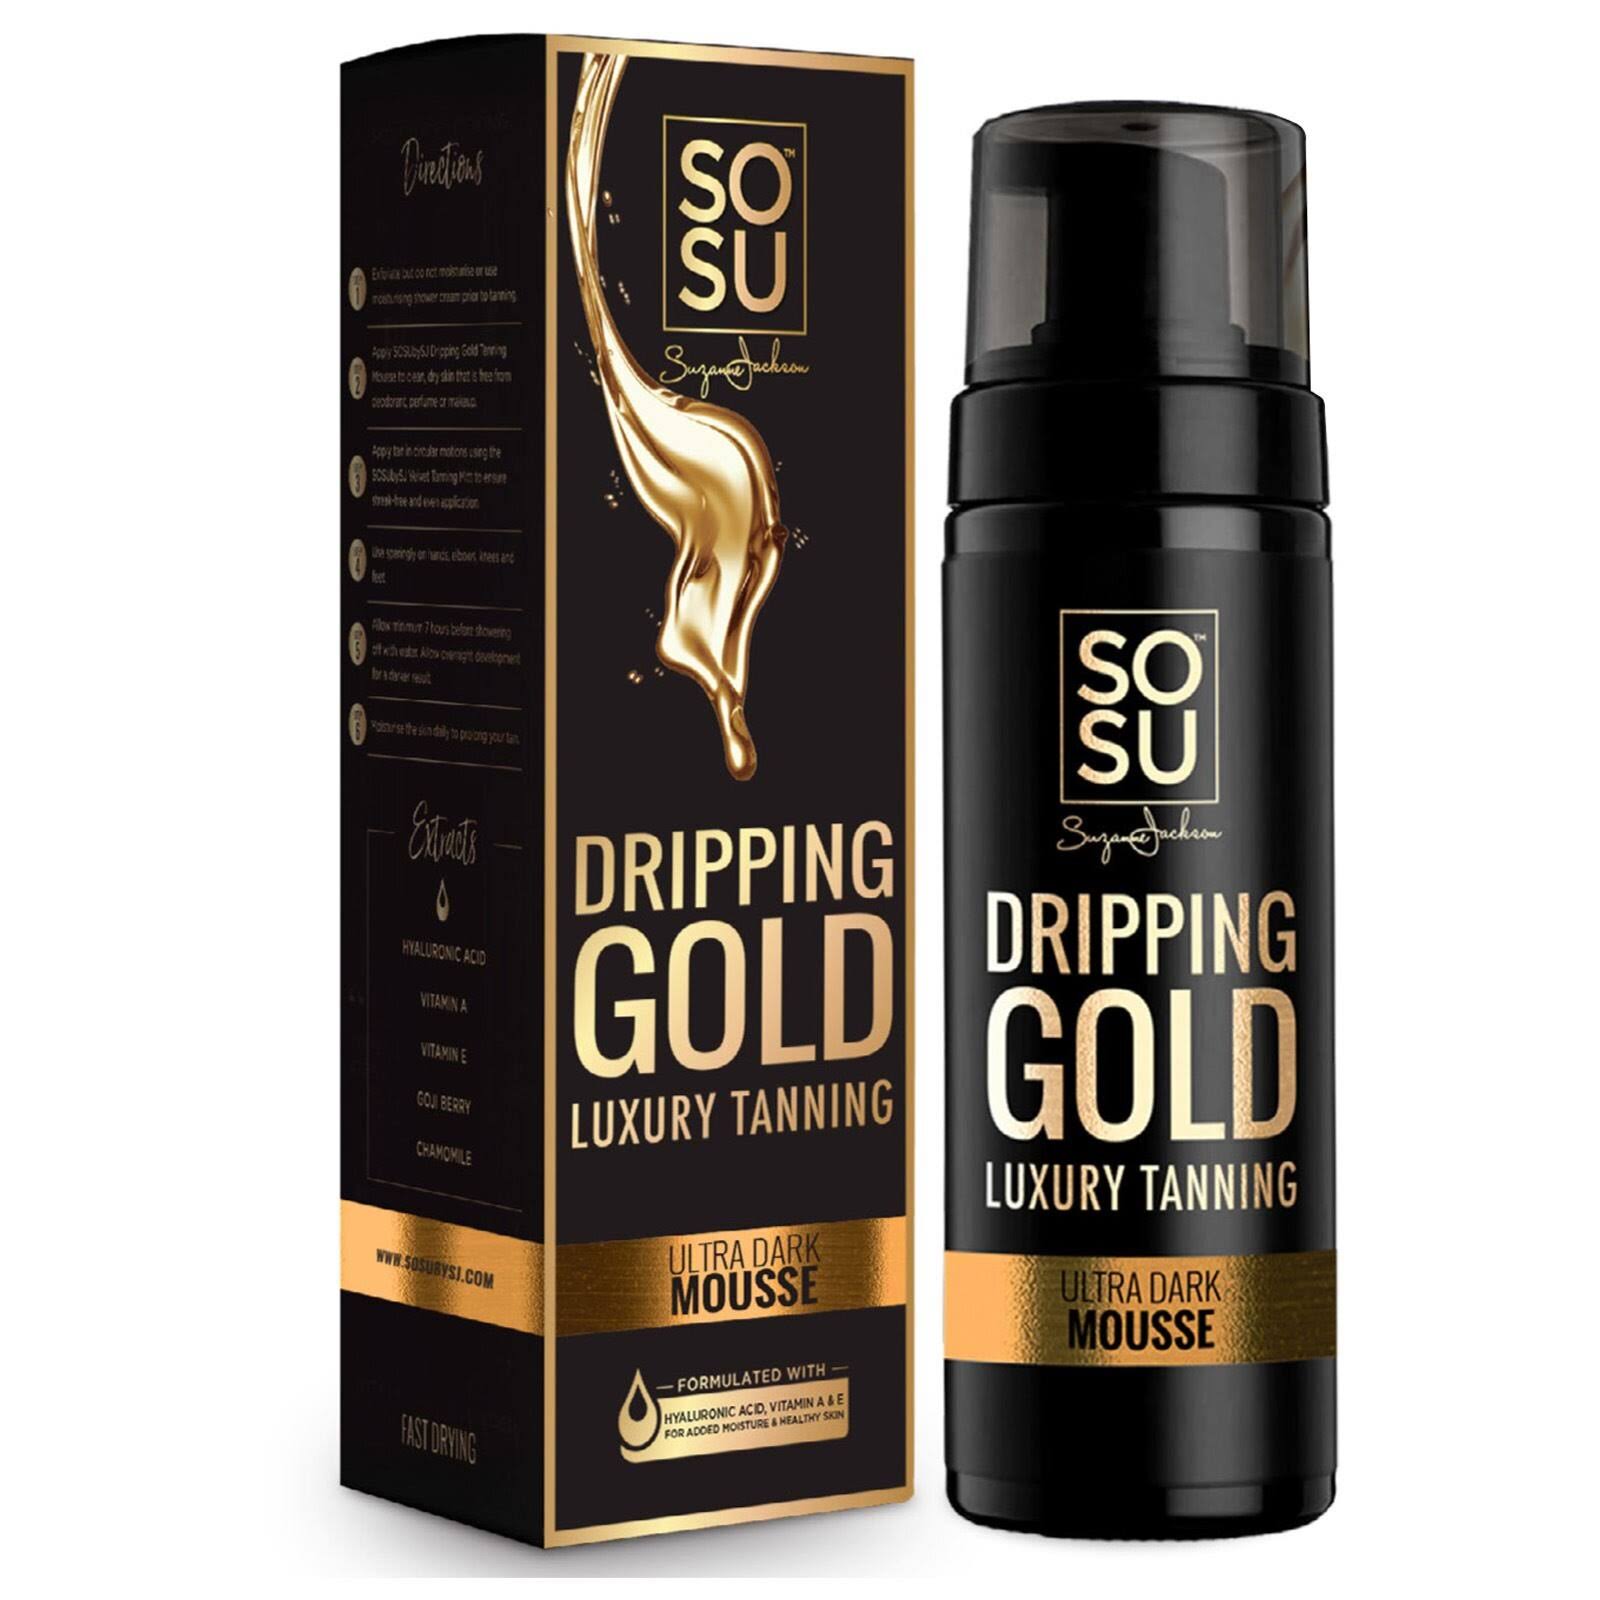 Dripping Gold - Luxury Tanning Mousse - ultra-dark